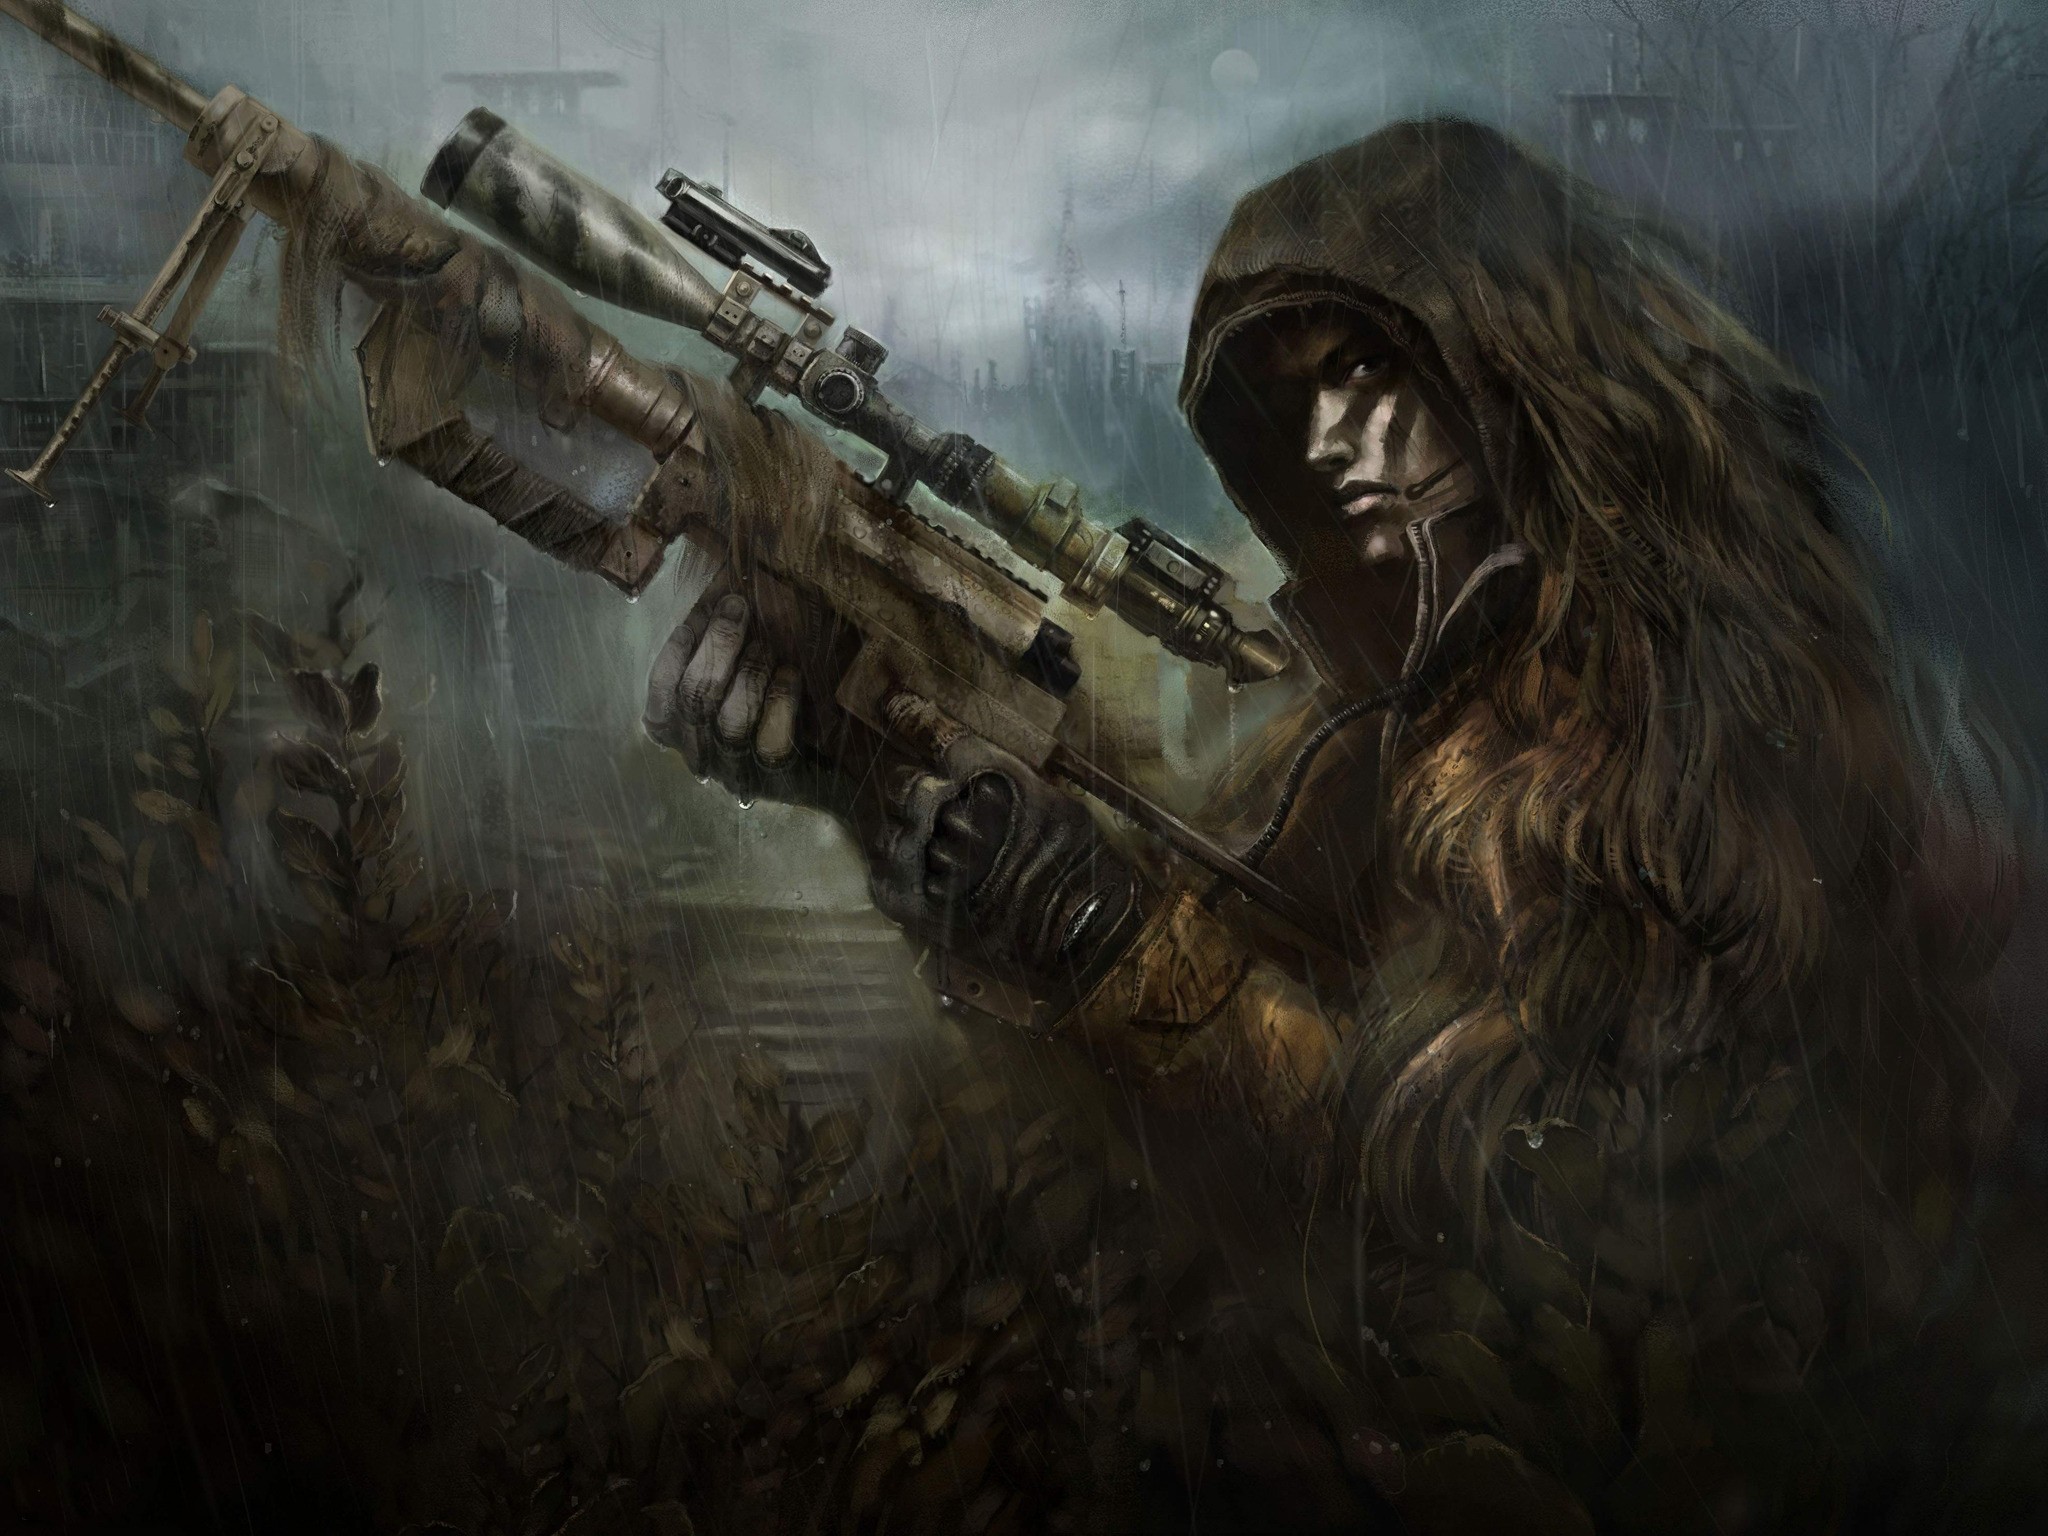 General 2048x1536 artwork chey-tac rain weapon digital art boys with guns gun gloves hoods looking at viewer scopes sniper rifle frown closed mouth camouflage